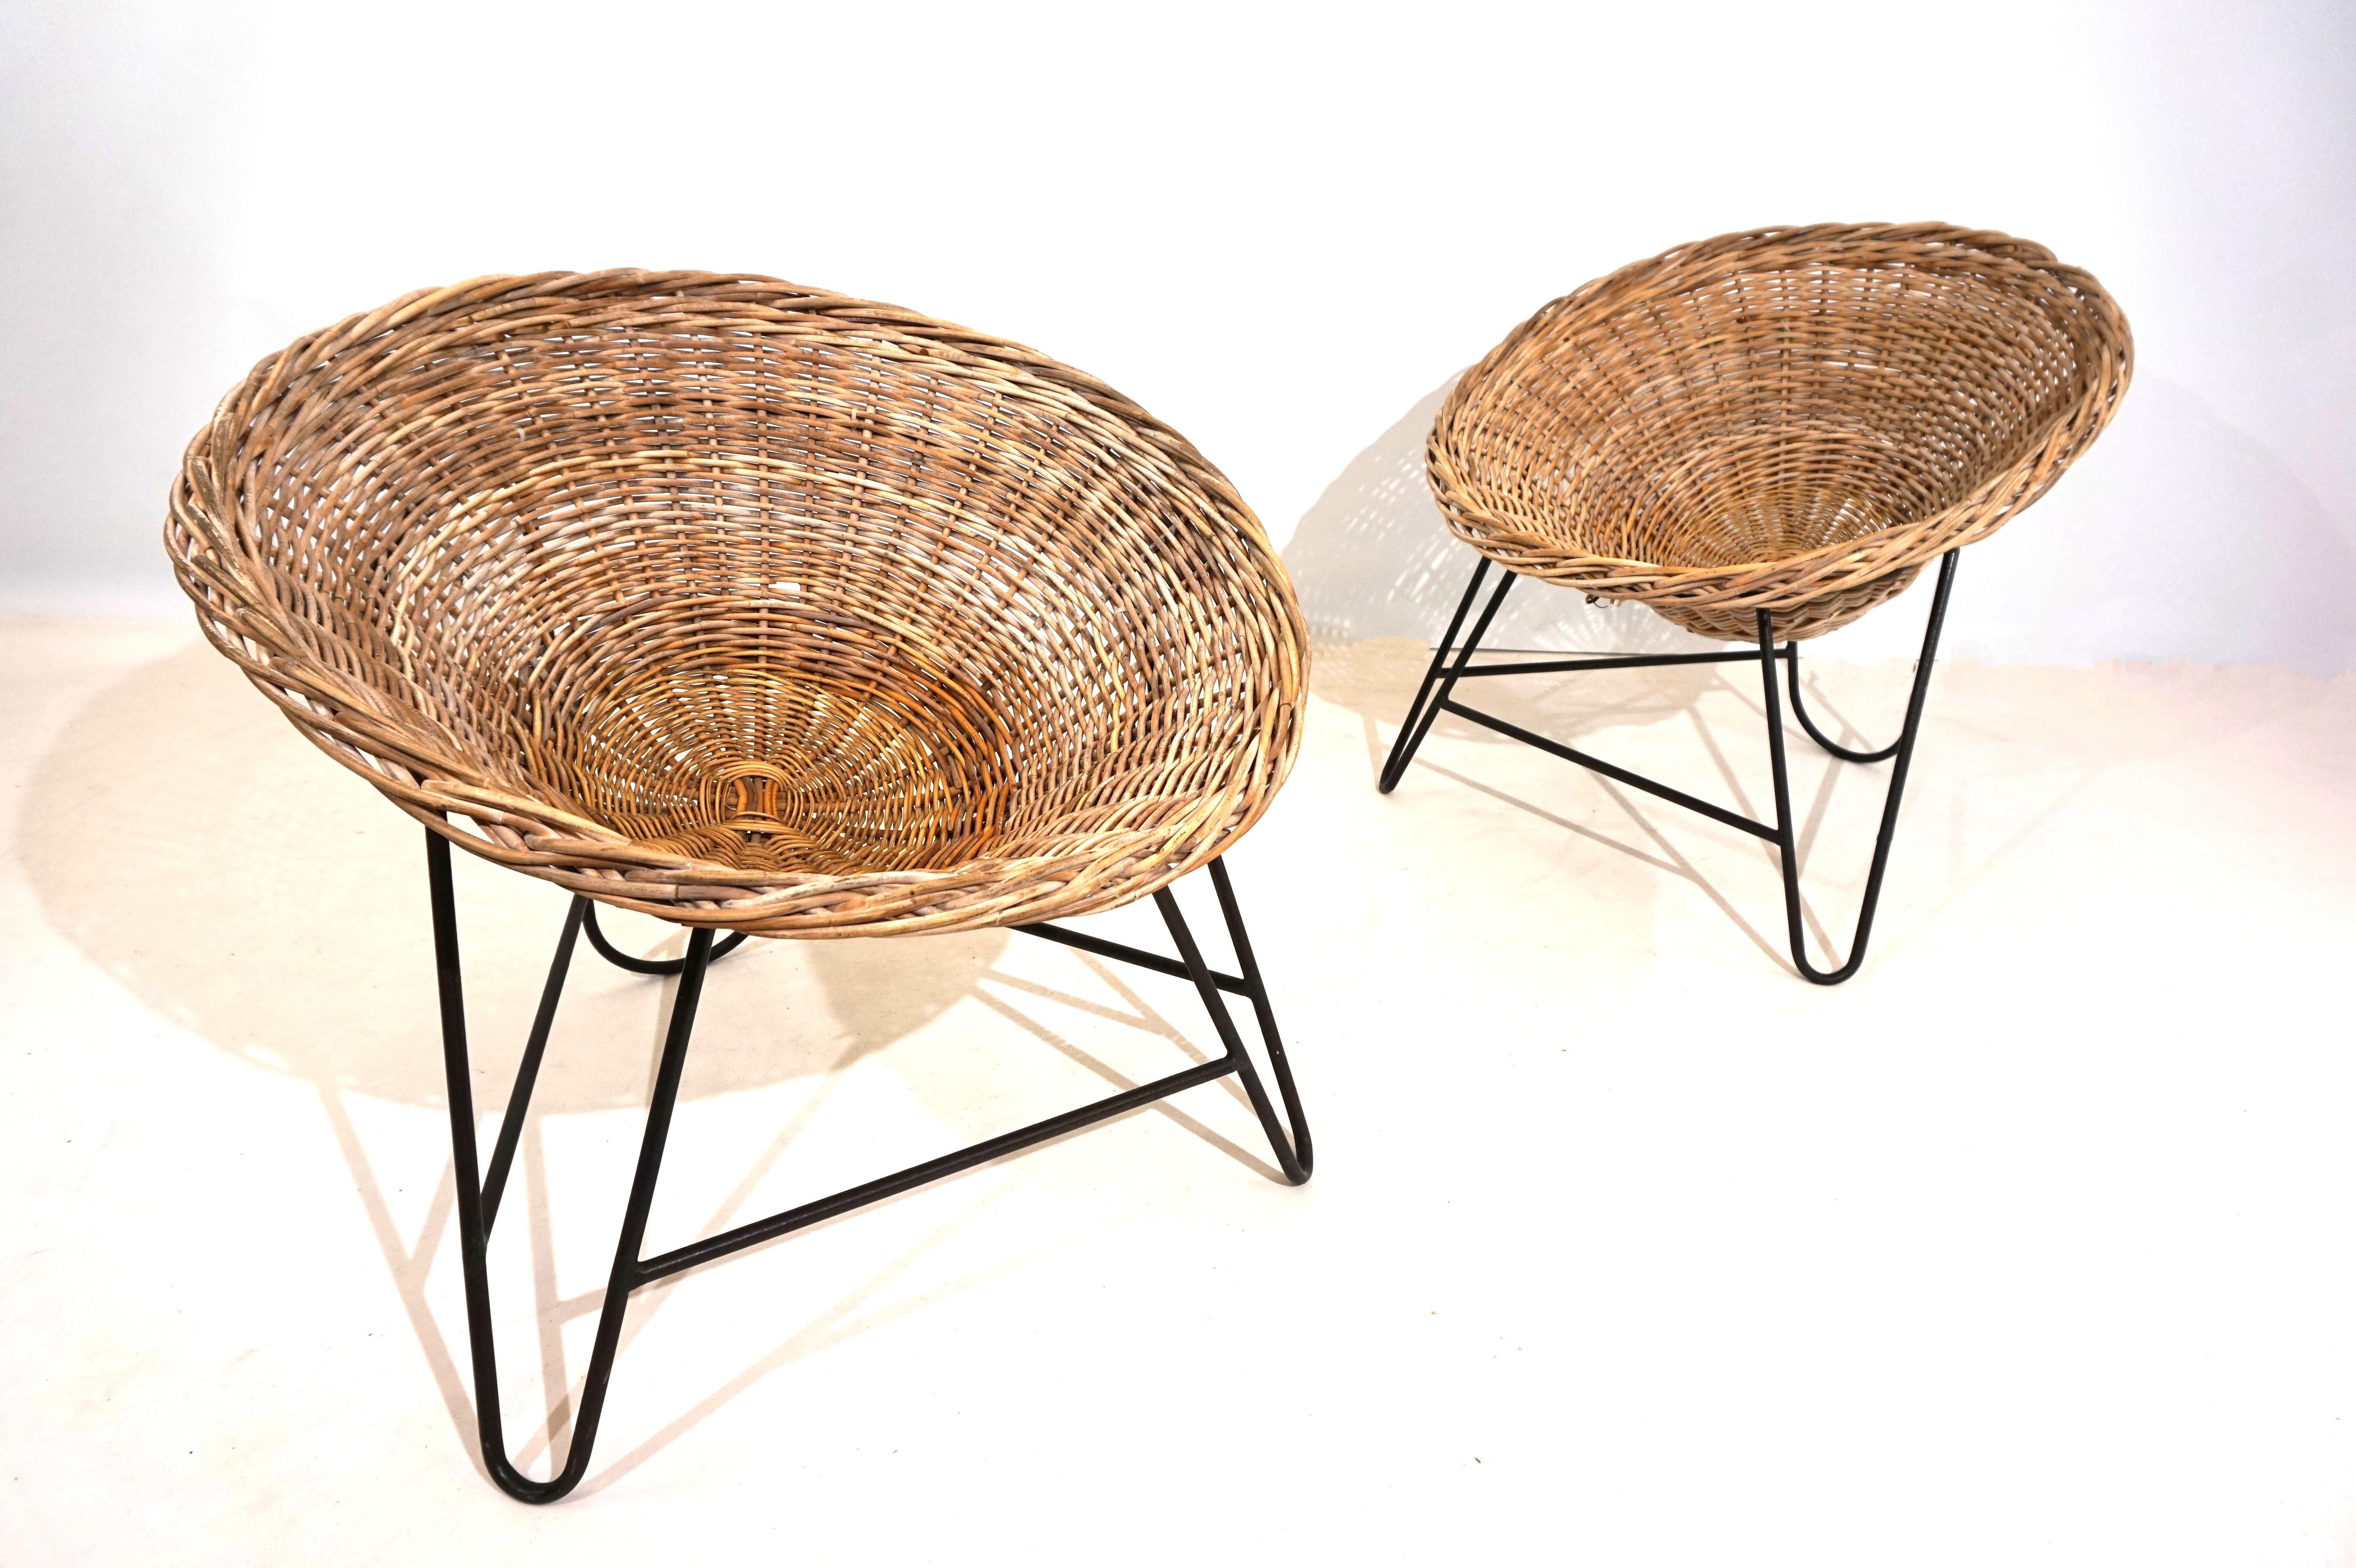 The set of 2 rattan chairs is in good condition. The wickerwork shows no signs of damage and is solid; the metal frame covered with black plastic shows some detachment of the plastic coating and signs of wear. The armchairs have developed a